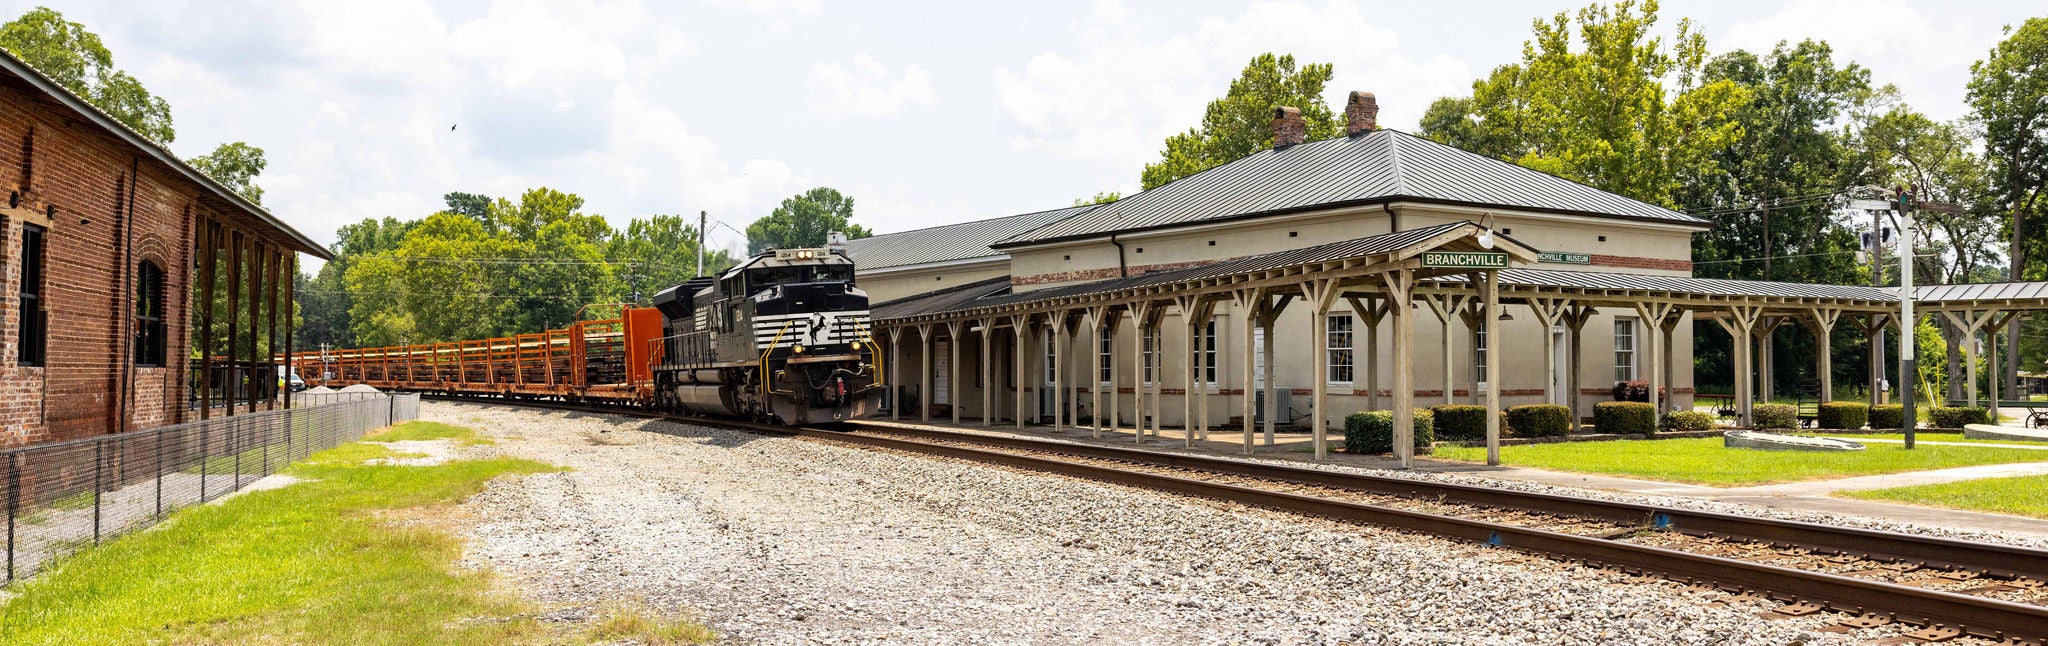 Train moving through historic train yard in a way that promotes community safety.